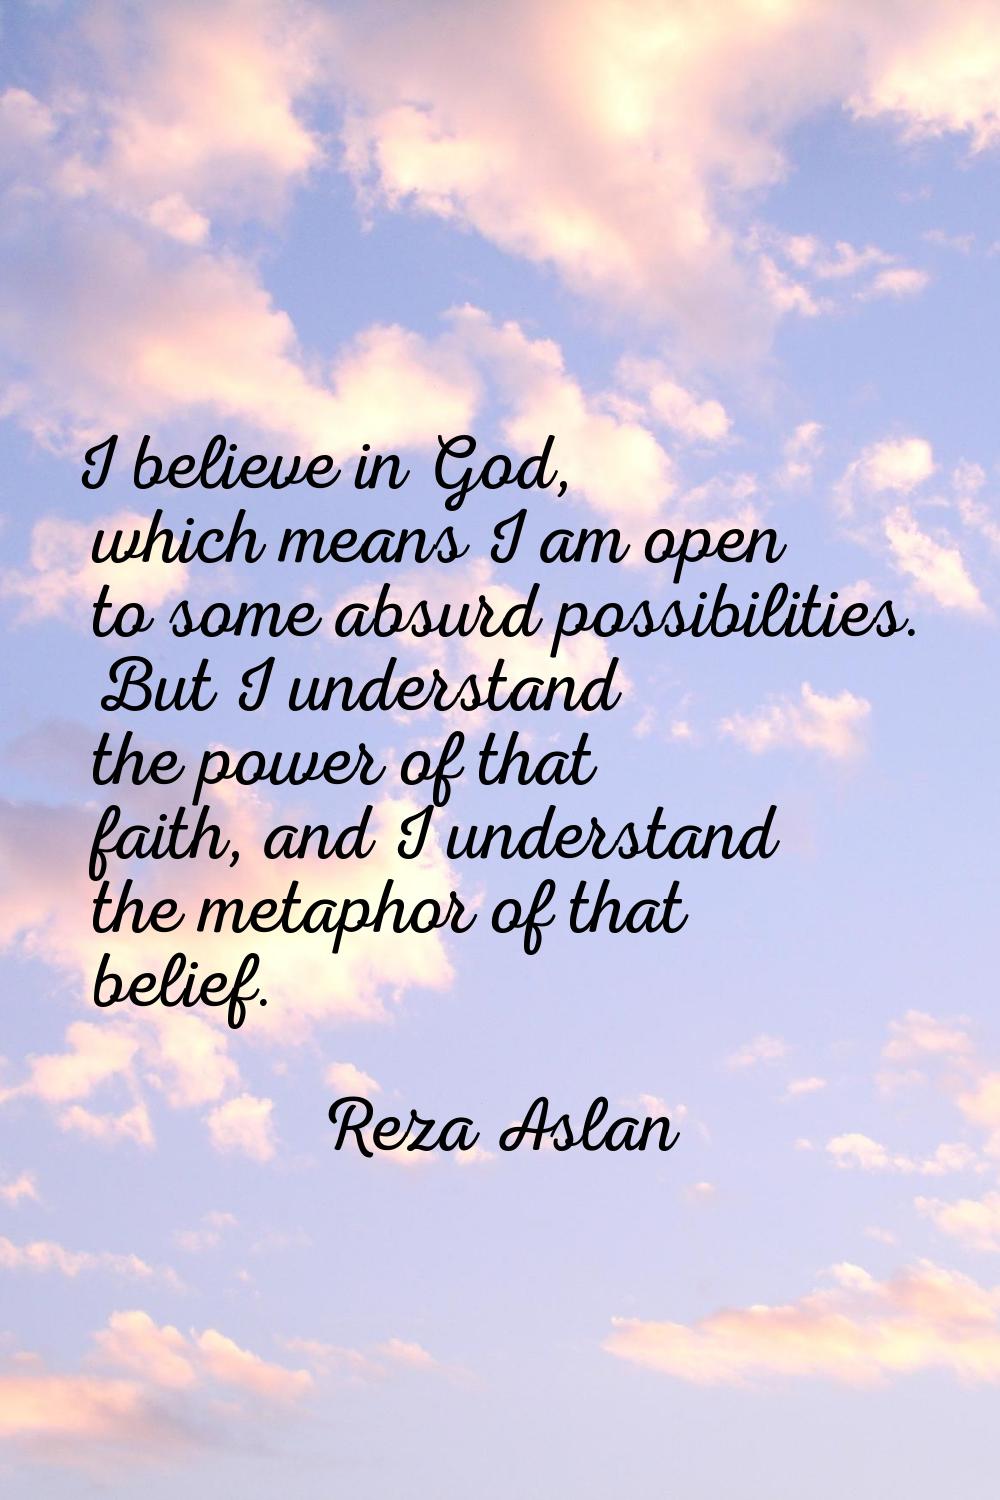 I believe in God, which means I am open to some absurd possibilities. But I understand the power of